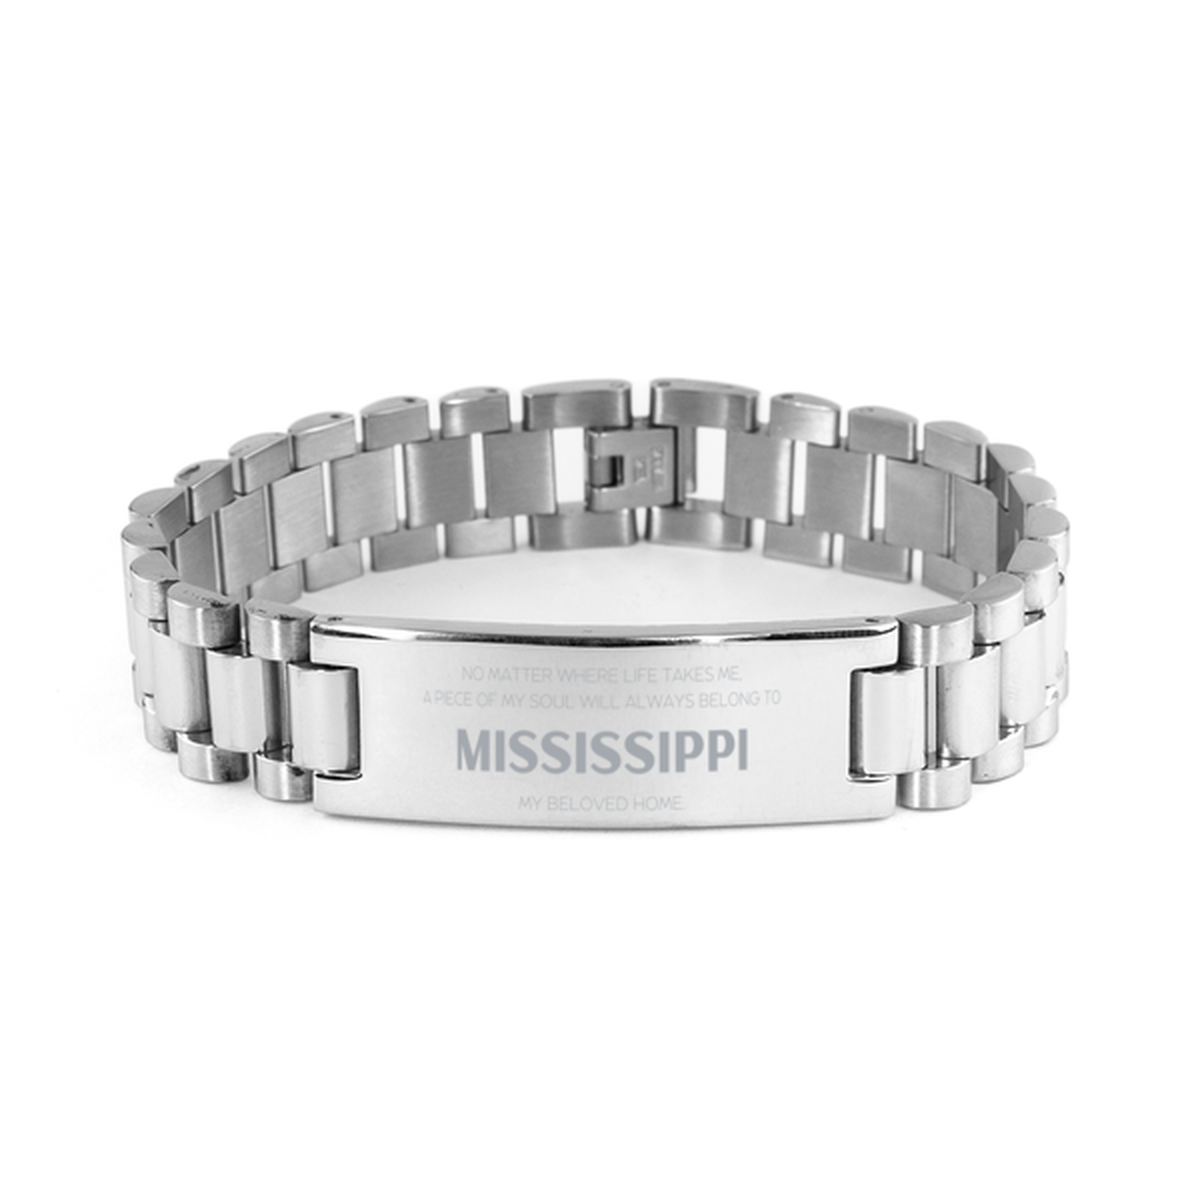 Love Mississippi State Gifts, My soul will always belong to Mississippi, Proud Ladder Stainless Steel Bracelet, Birthday Unique Gifts For Mississippi Men, Women, Friends